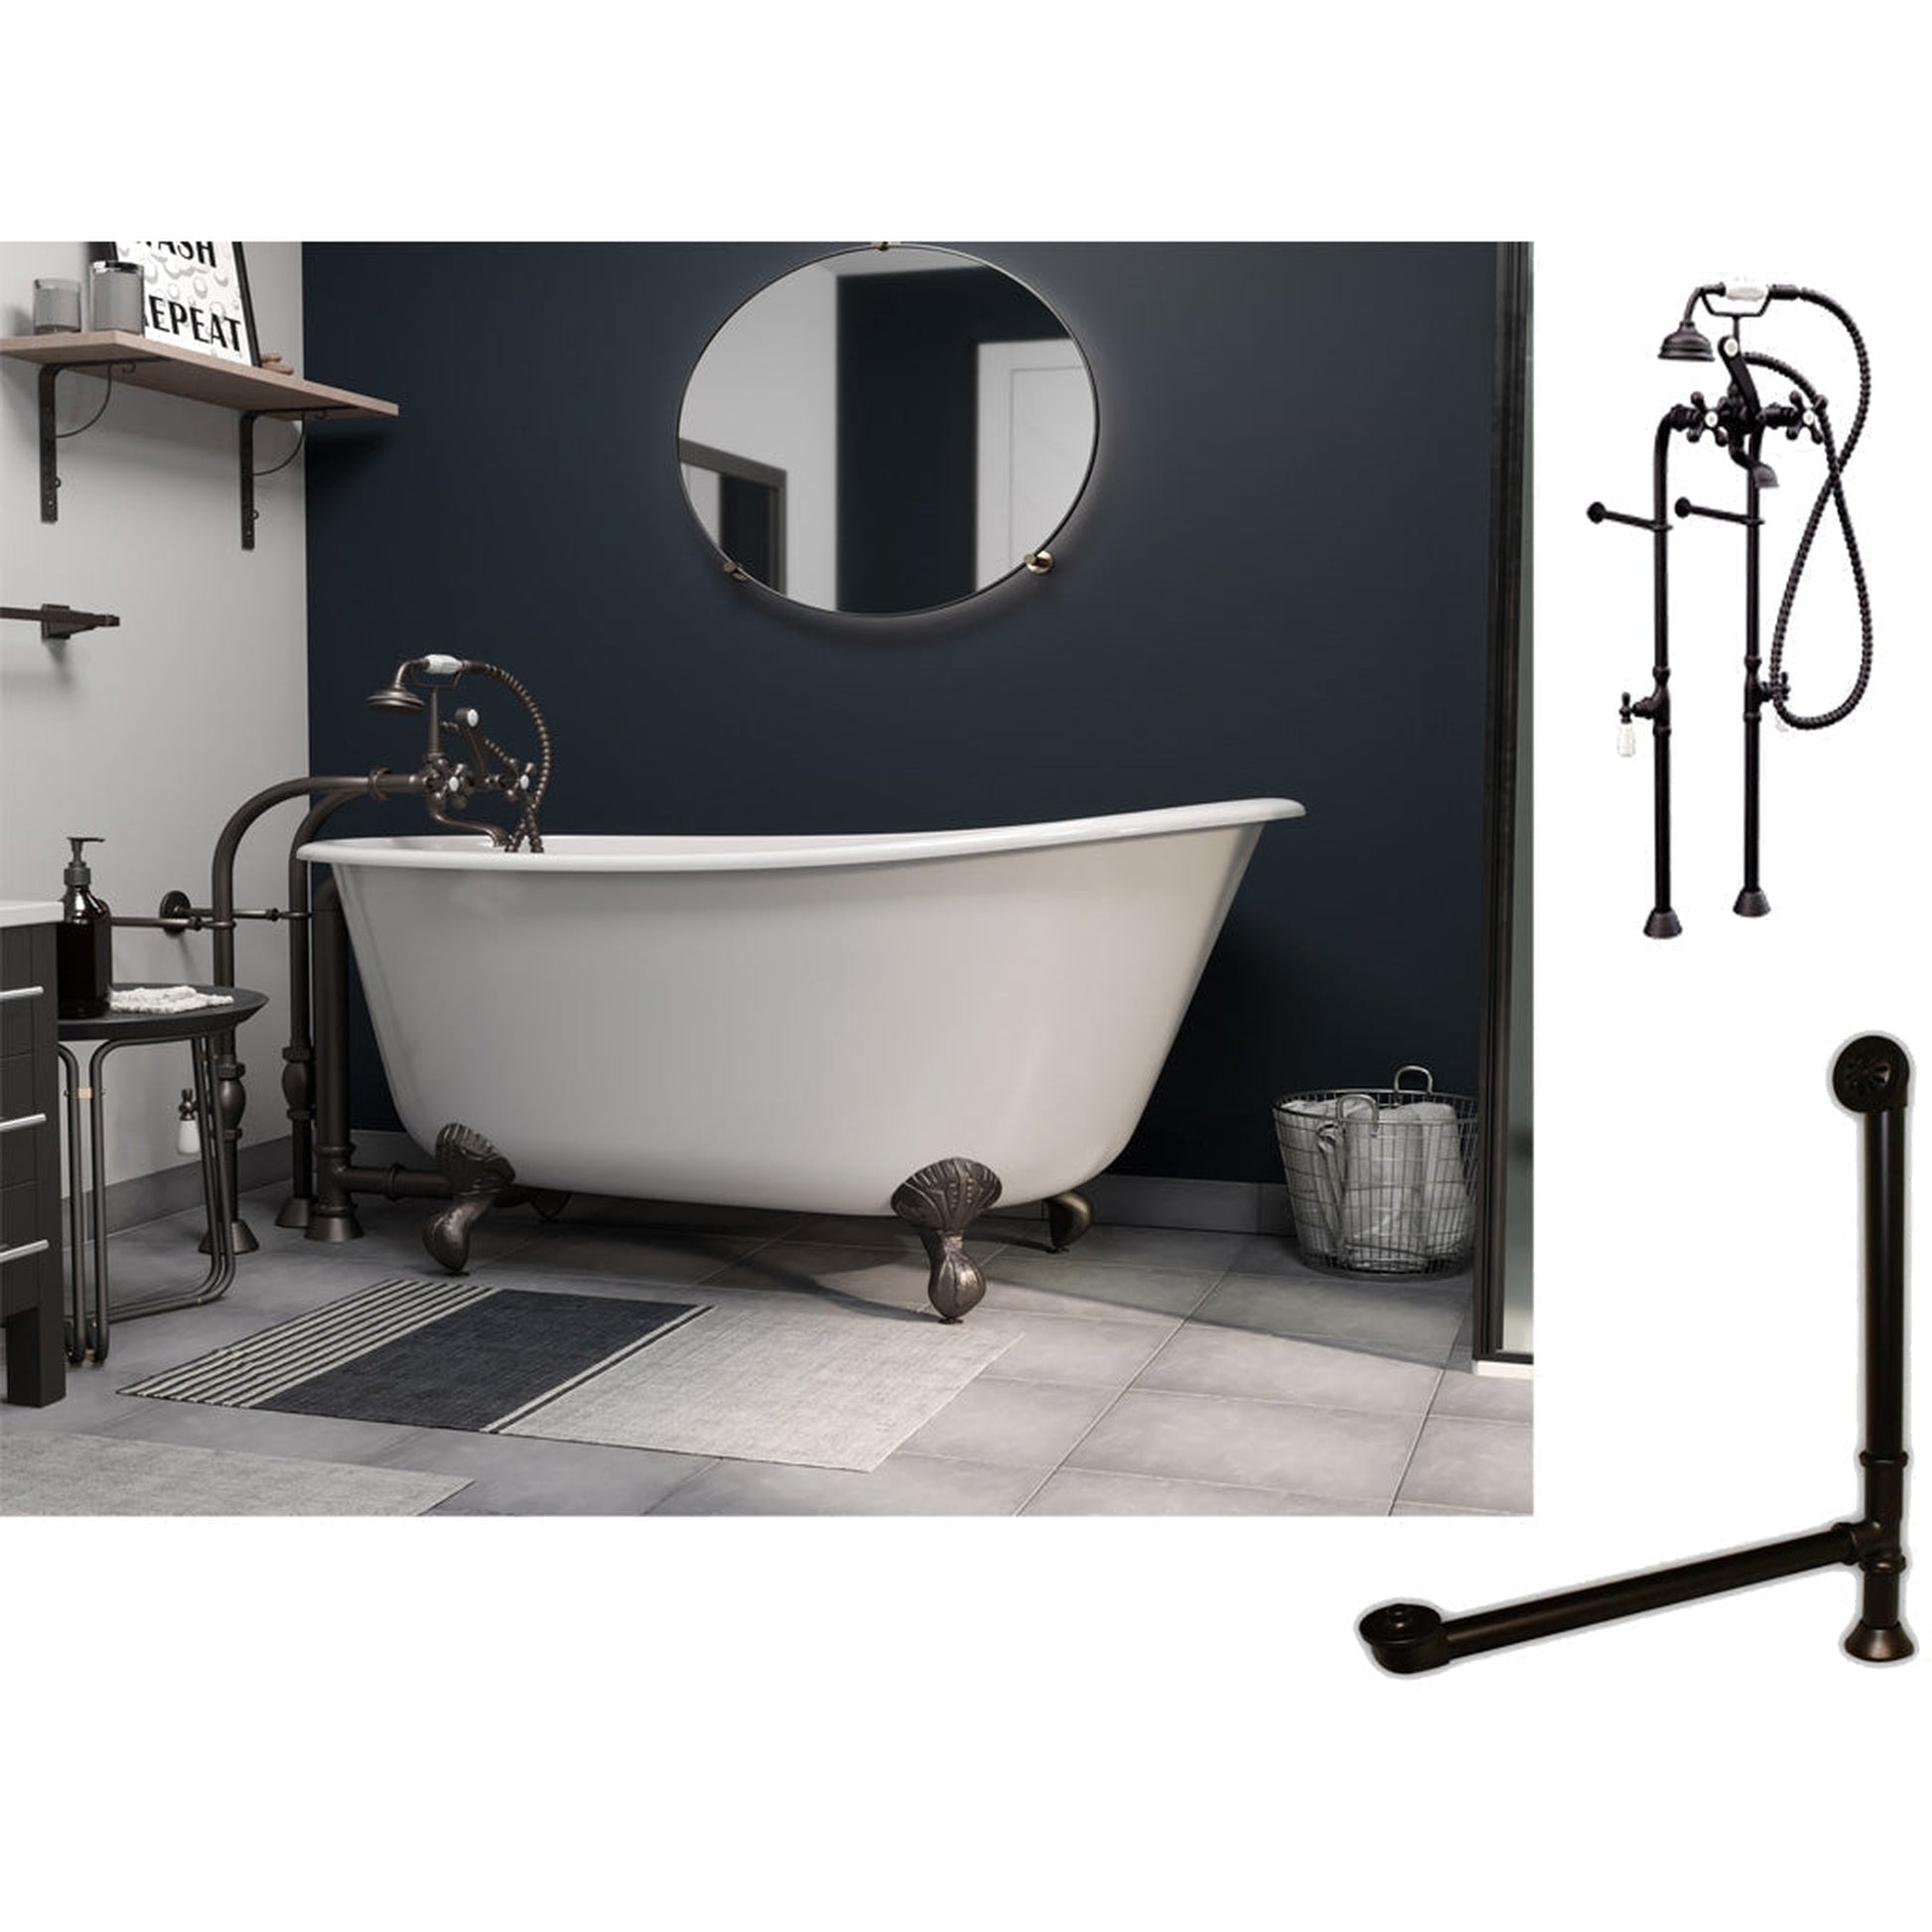 Cambridge Plumbing 54" White Cast Iron Swedish Single Slipper Clawfoot Bathtub With No Deck Holes And Complete Plumbing Package Including Modern Floor Mounted British Telephone Faucet, Drain And Overflow Assembly In Oil Rubbed Bronze